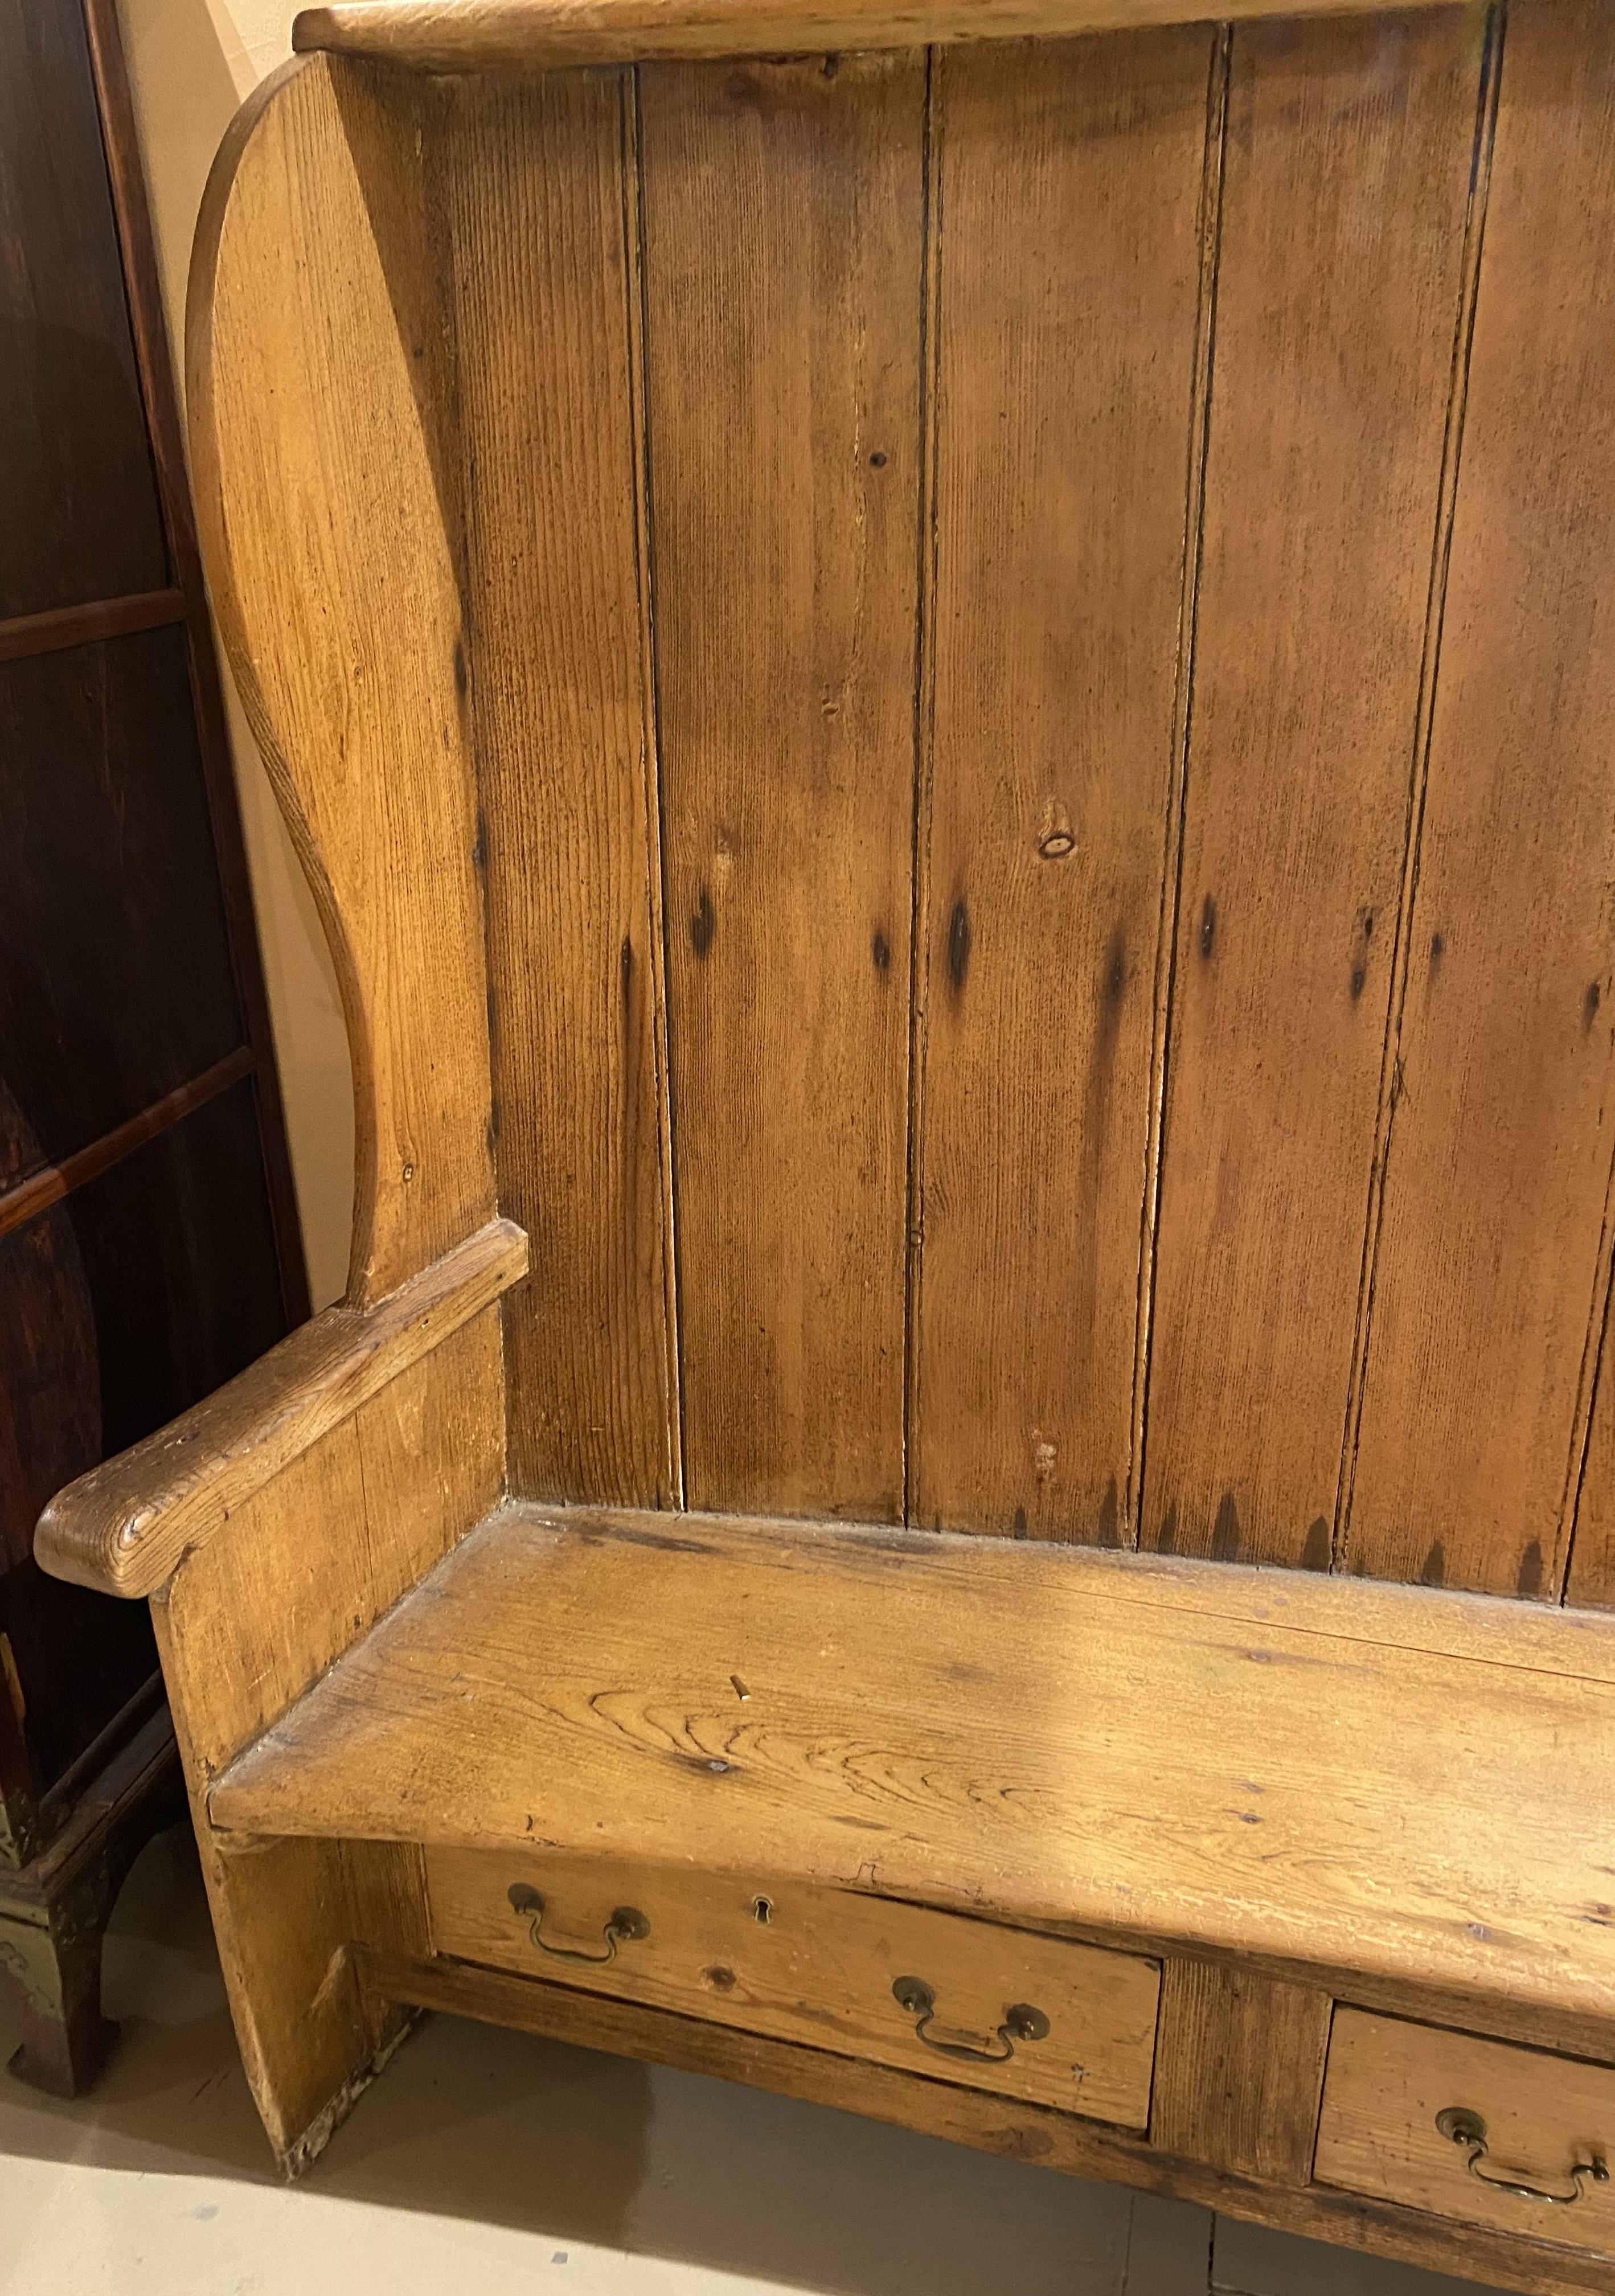 A great form large pine bow back settle bench with tongue and groove back, carved arms, conforming seat, and three fitted drawers. English in origin, dating to the late 18th century, in good overall condition, with some molding losses and water